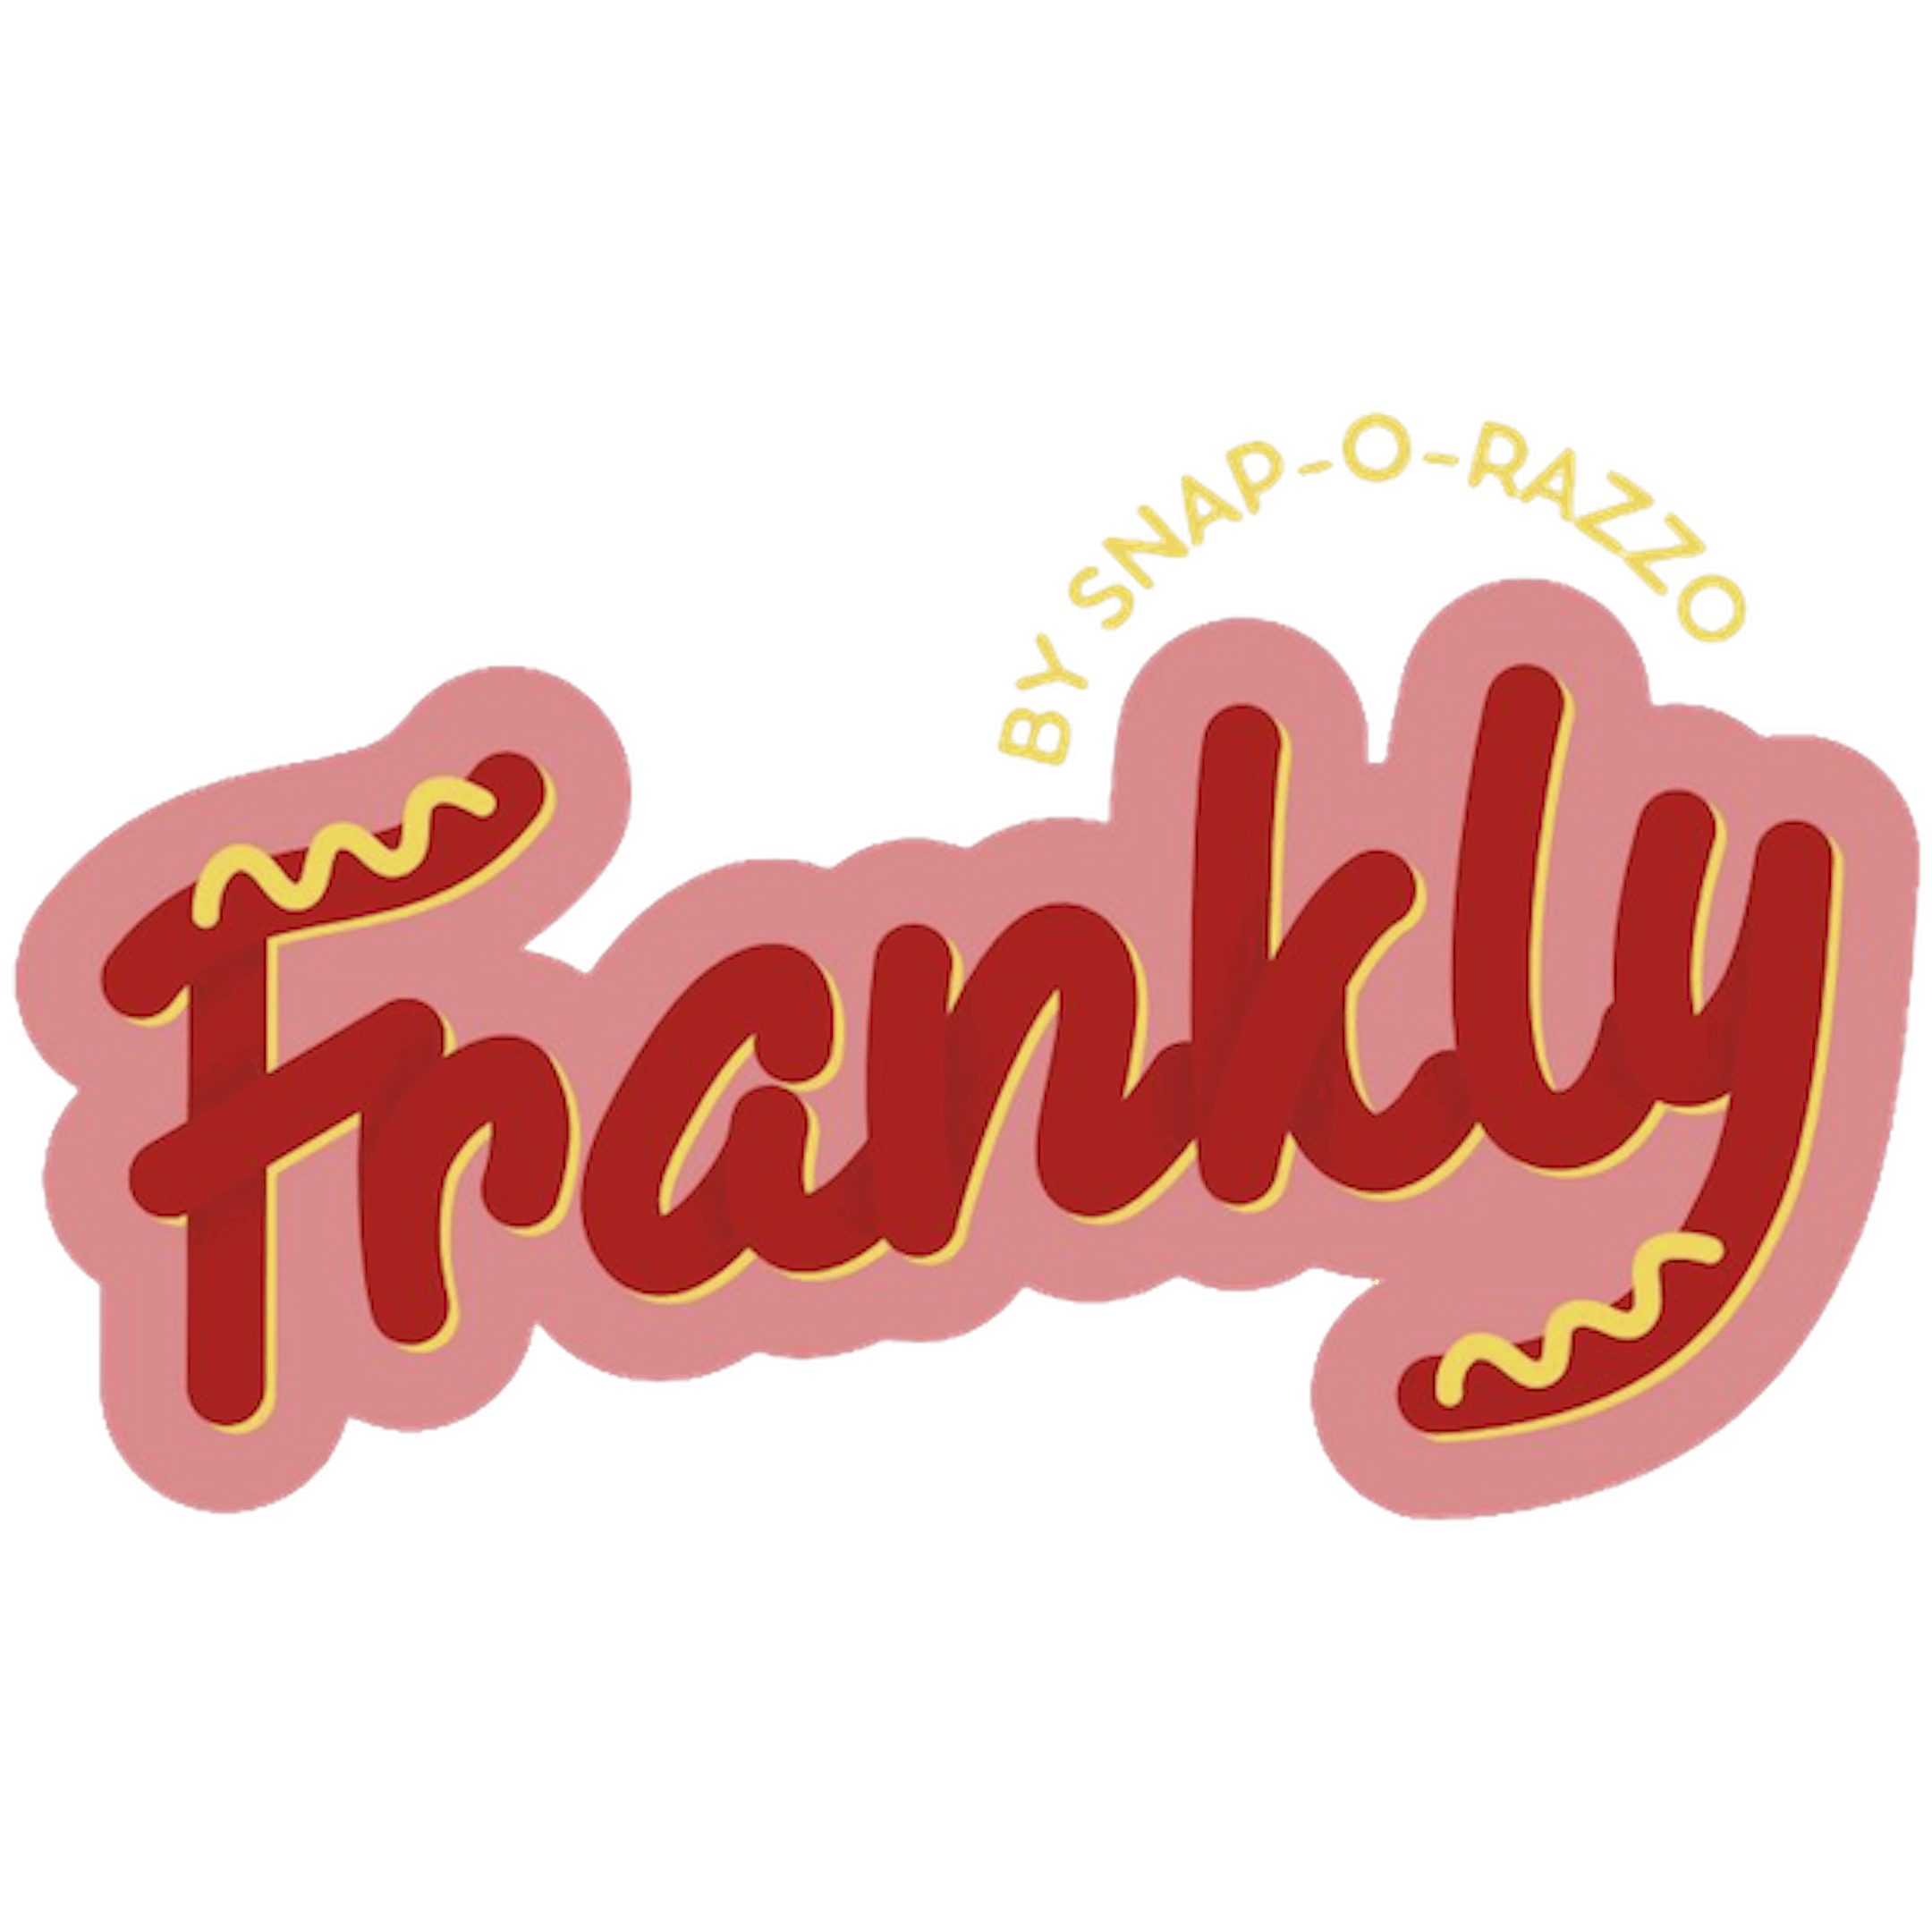 Frankly By Snap-O-Razzo